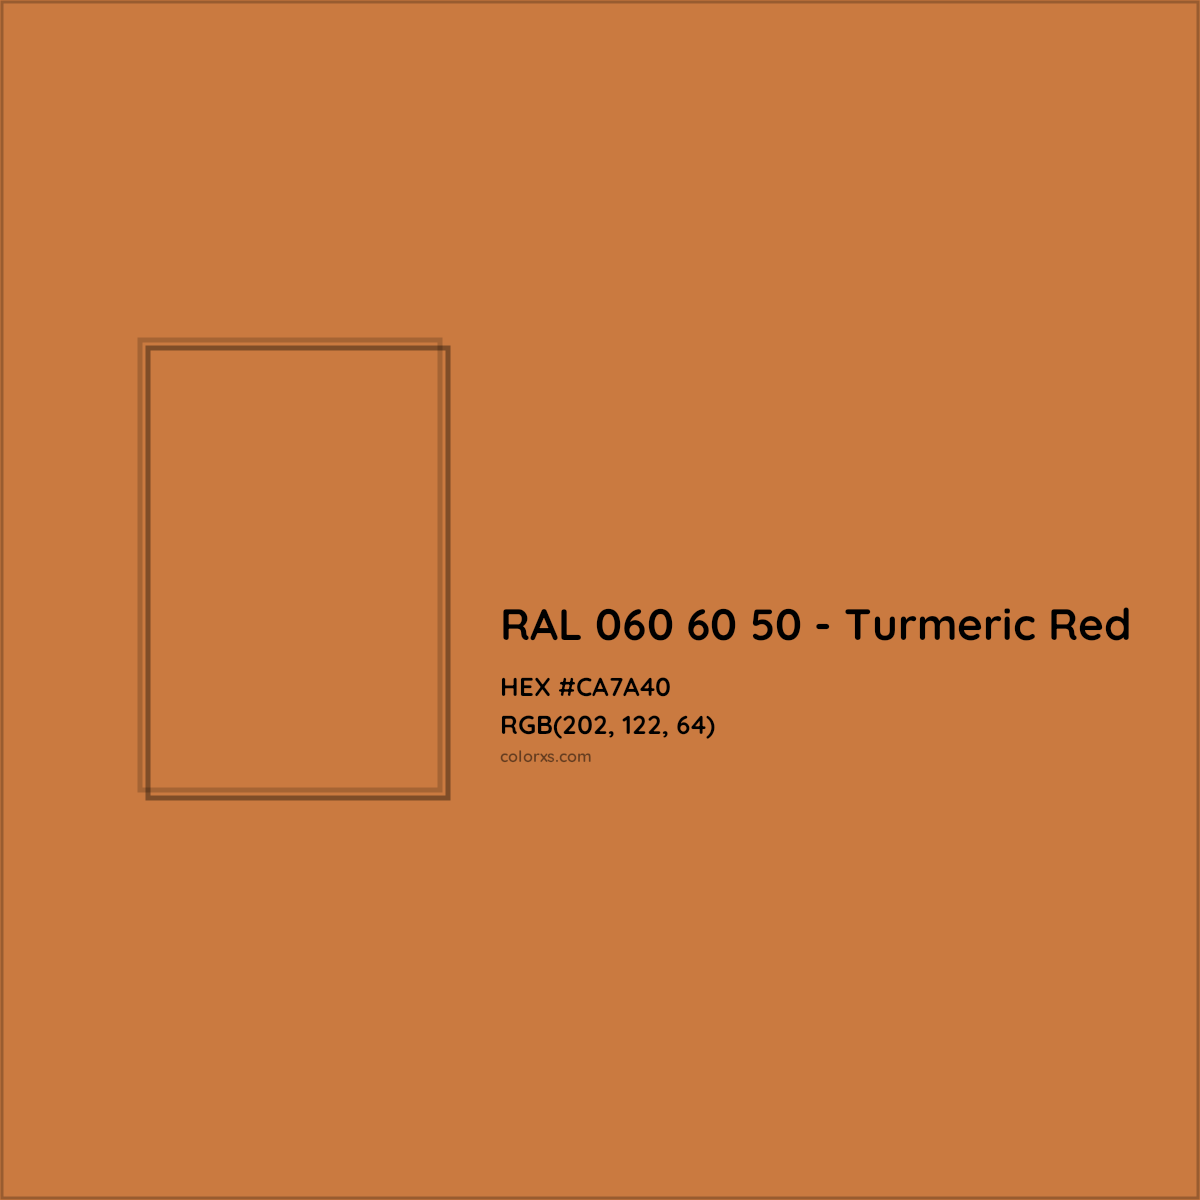 HEX #CA7A40 RAL 060 60 50 - Turmeric Red CMS RAL Design - Color Code